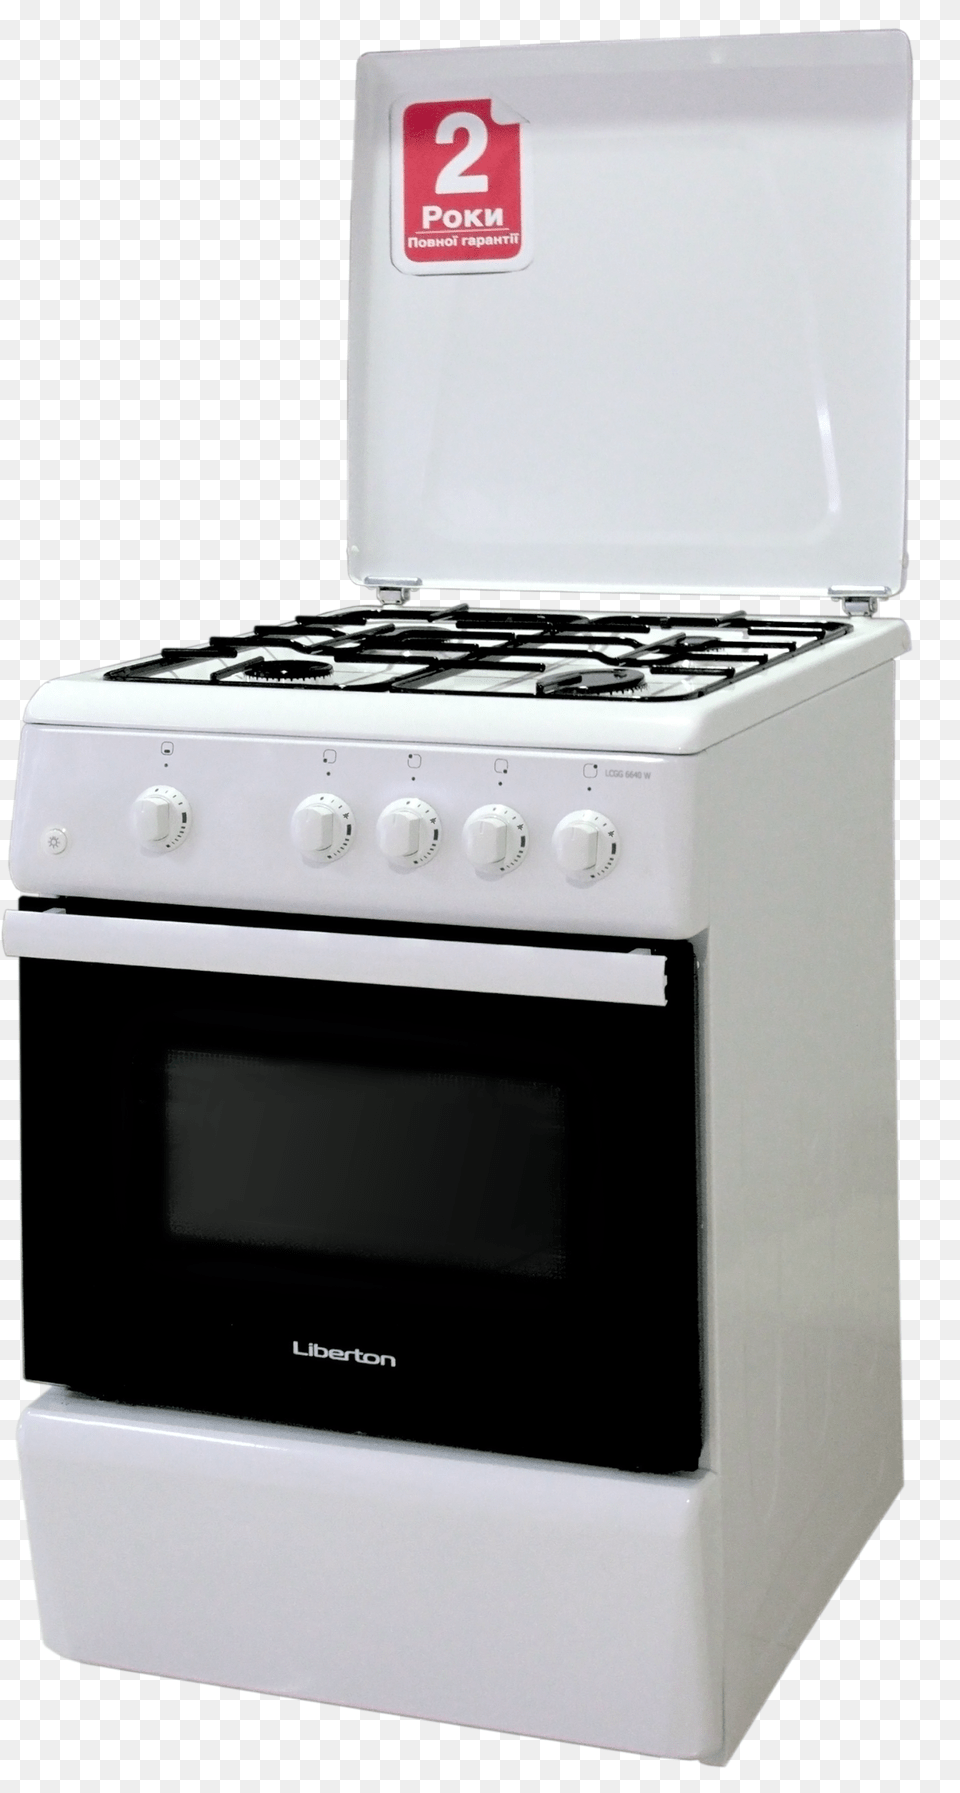 Lcgg 6640 W Mf, Appliance, Oven, Stove, Electrical Device Free Transparent Png